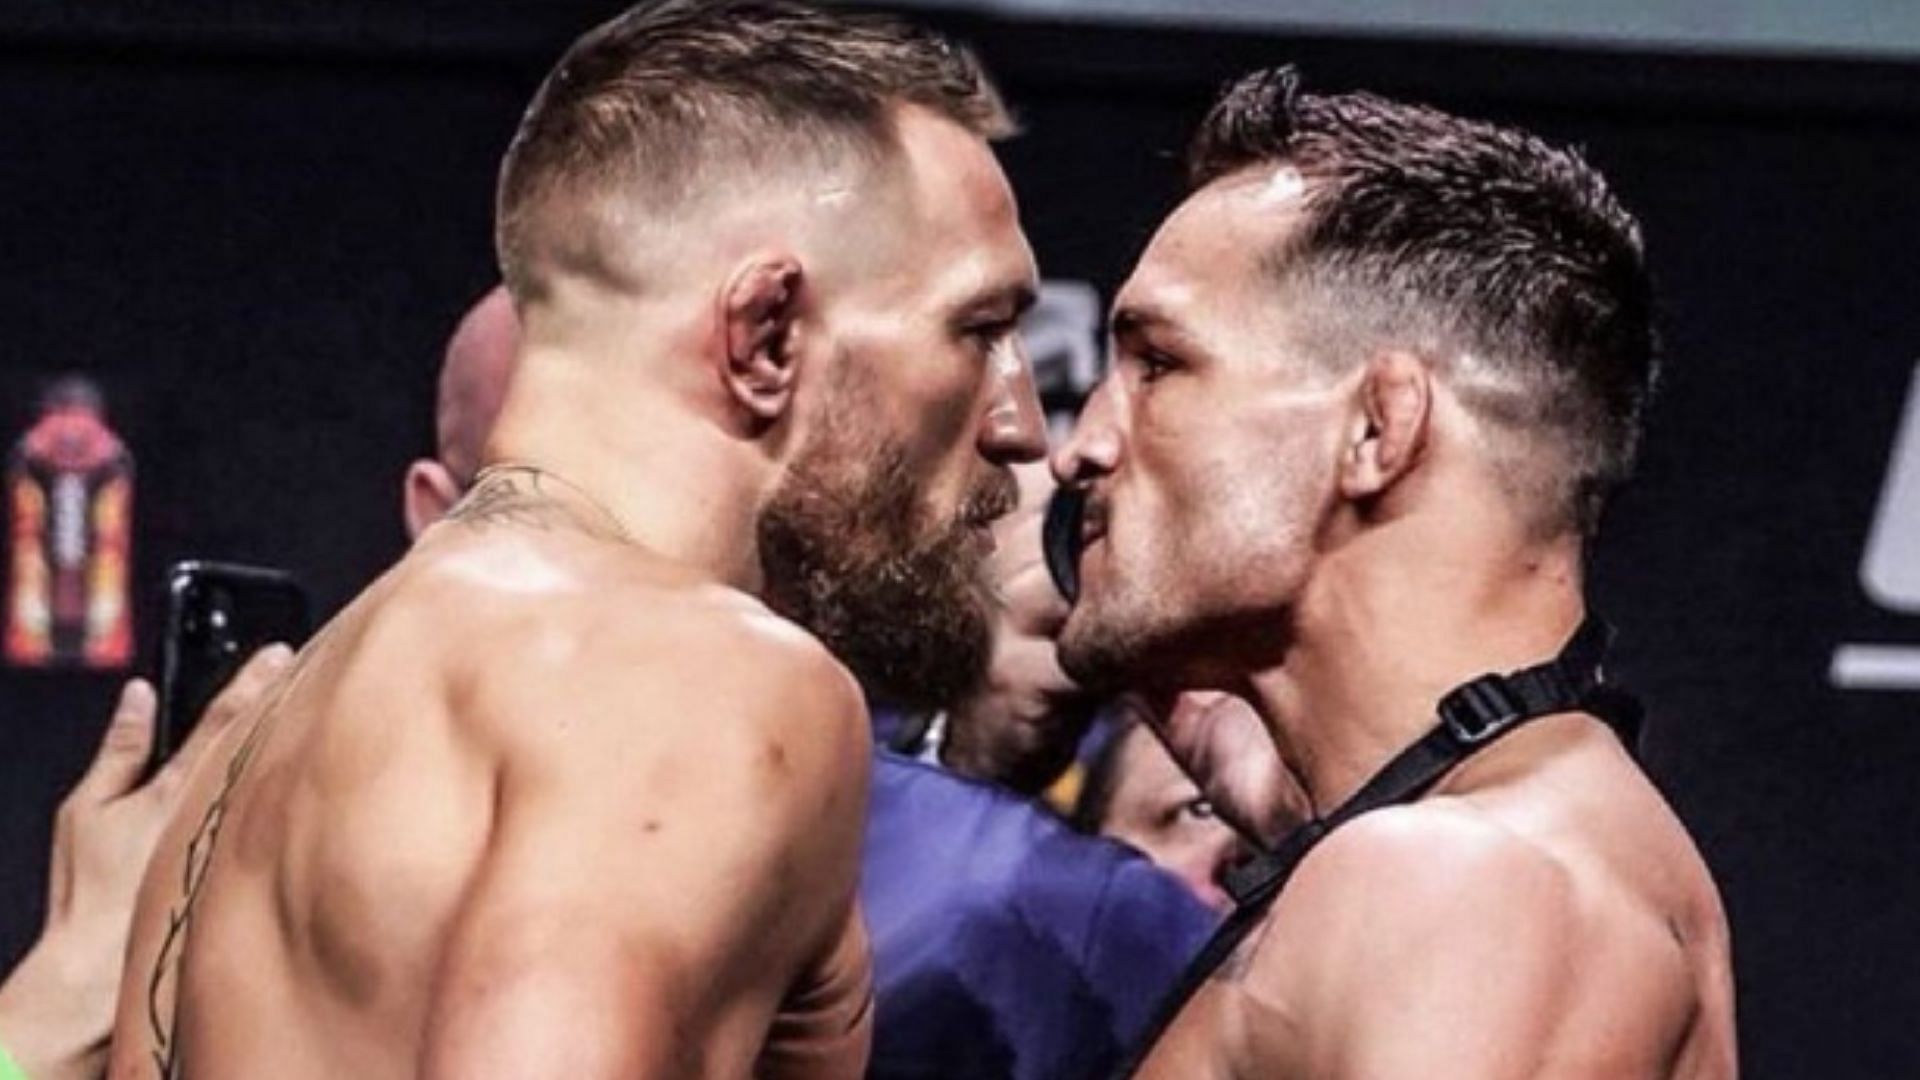 Michael Chandler (right) issues stern warning to Conor McGregor (left) [Image courtesy of @mikechandlermma on Instagram]